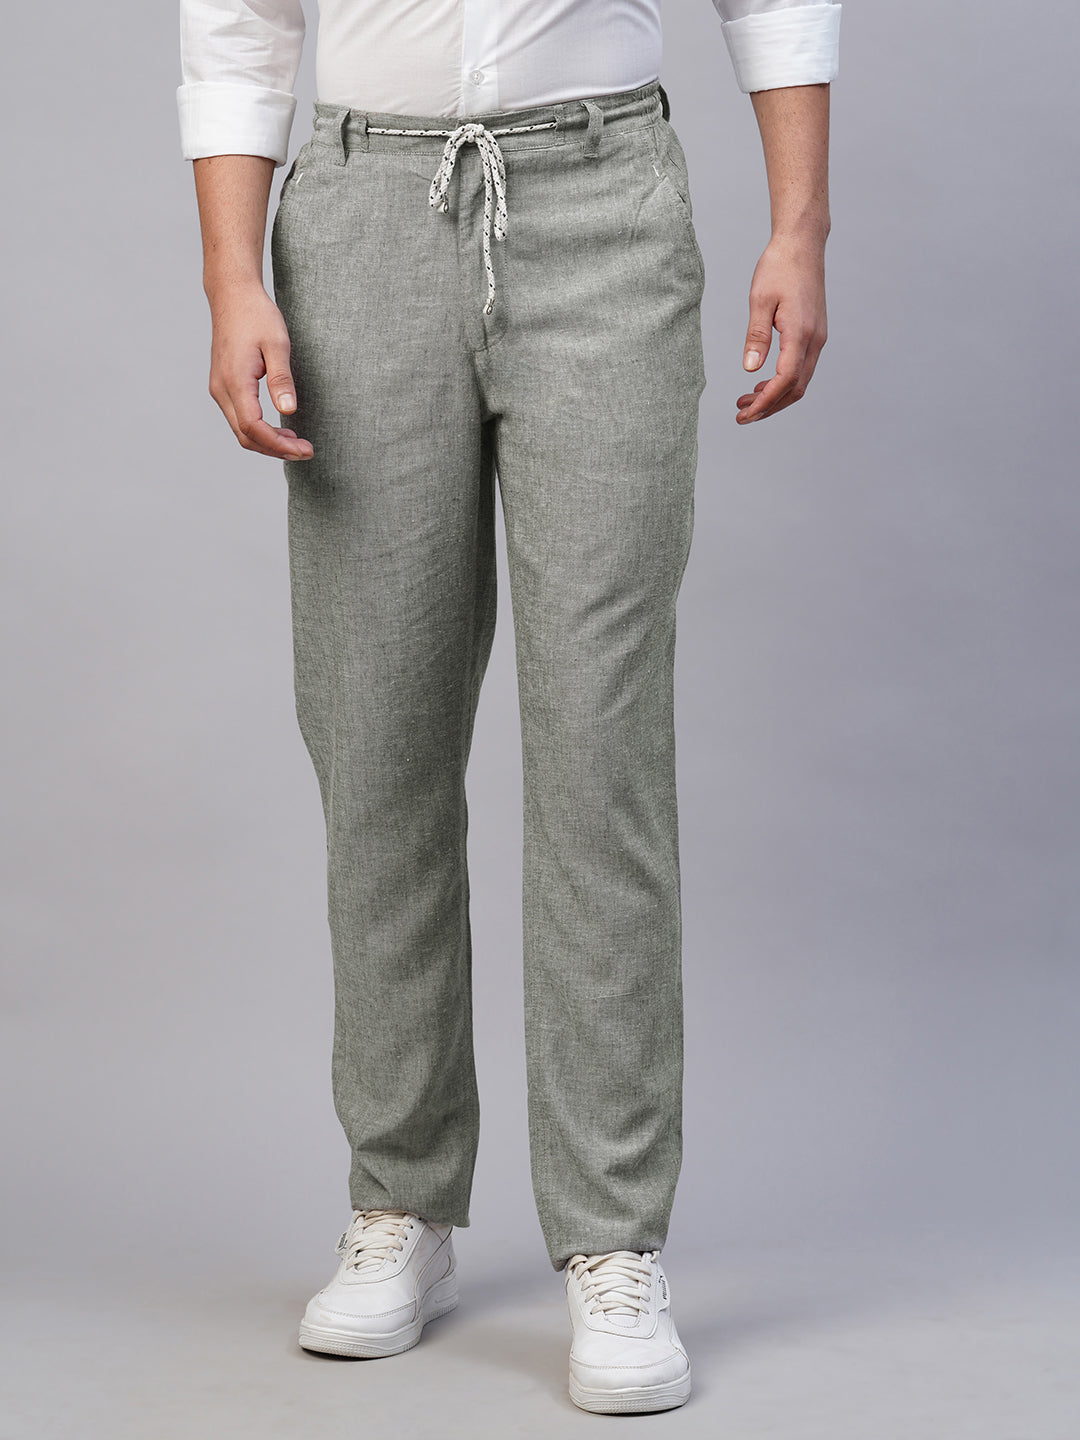 Allen Solly OffWhite Regular Fit Trousers  Buy Allen Solly OffWhite Regular  Fit Trousers Online at Low Price in India  Snapdeal